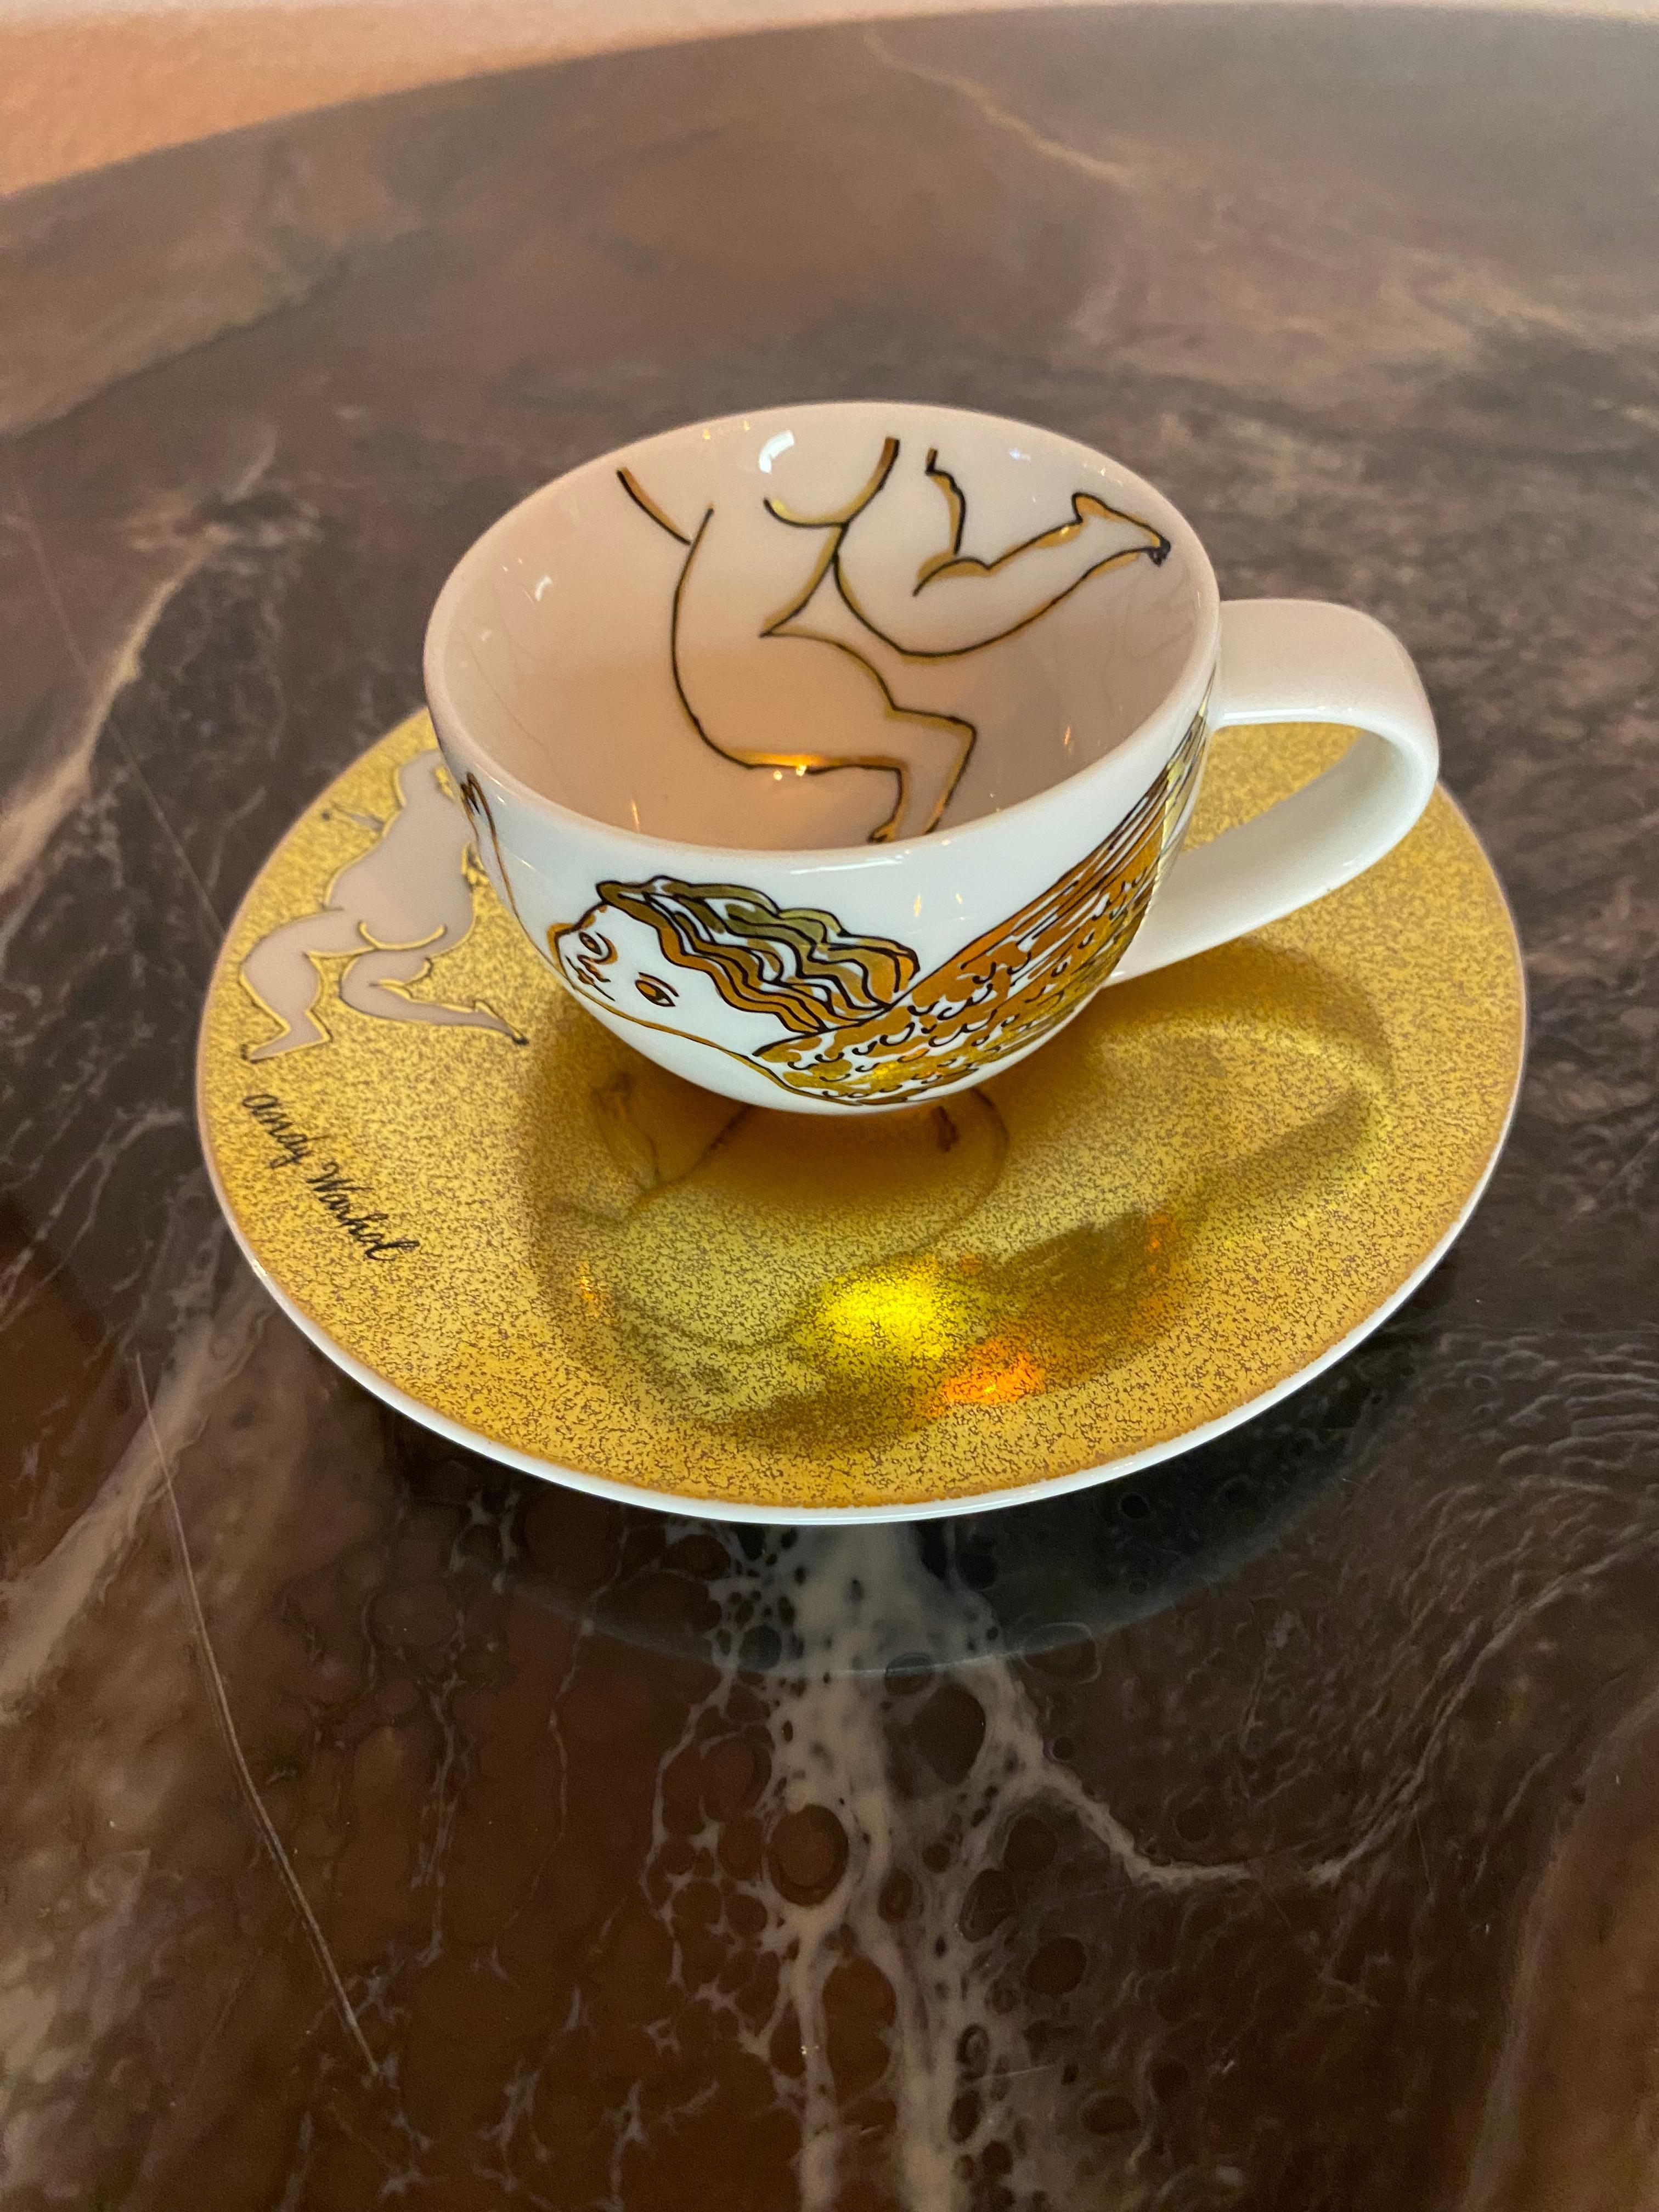 Rosenthal Studio-Line Andy Warhol christmas golden Angels espresso cup with saucer. Andy Warhol, quite possibly the greatest pop art artist of our time, loved Christmas and was known for giving his friends paintings of cupids as gifts. These